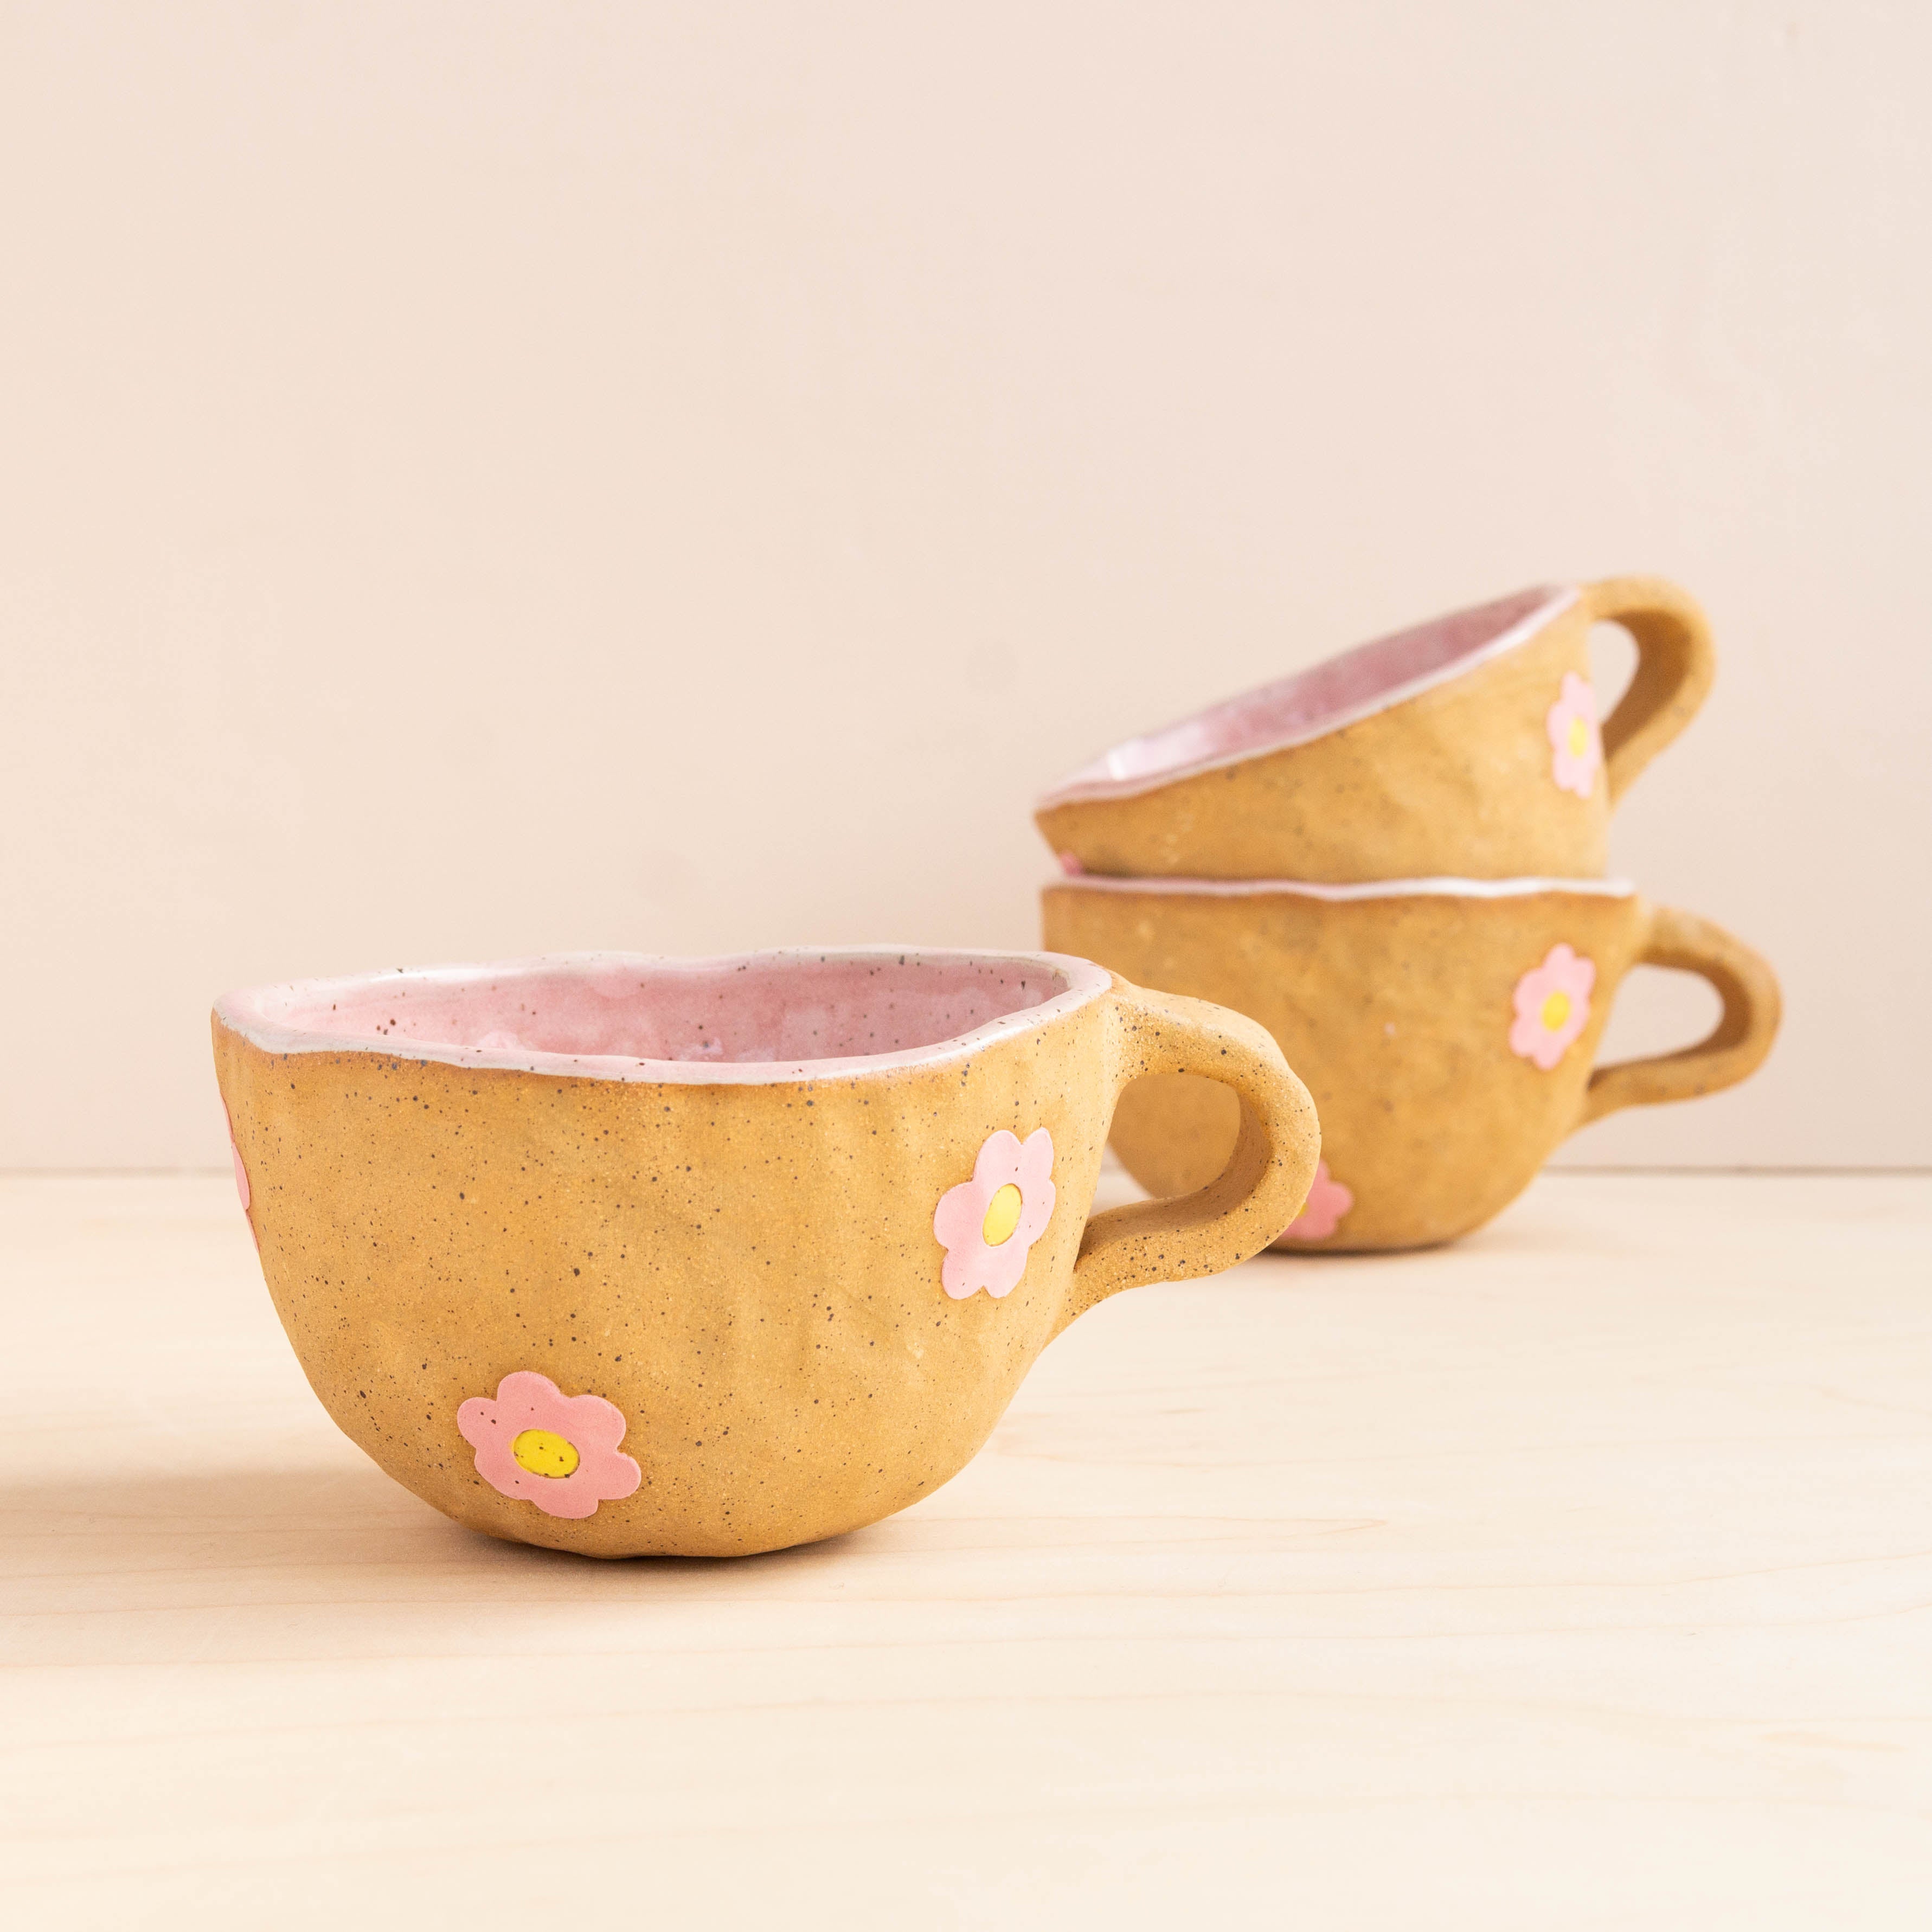 Earth and Her Flower: Pink Flower Teacup